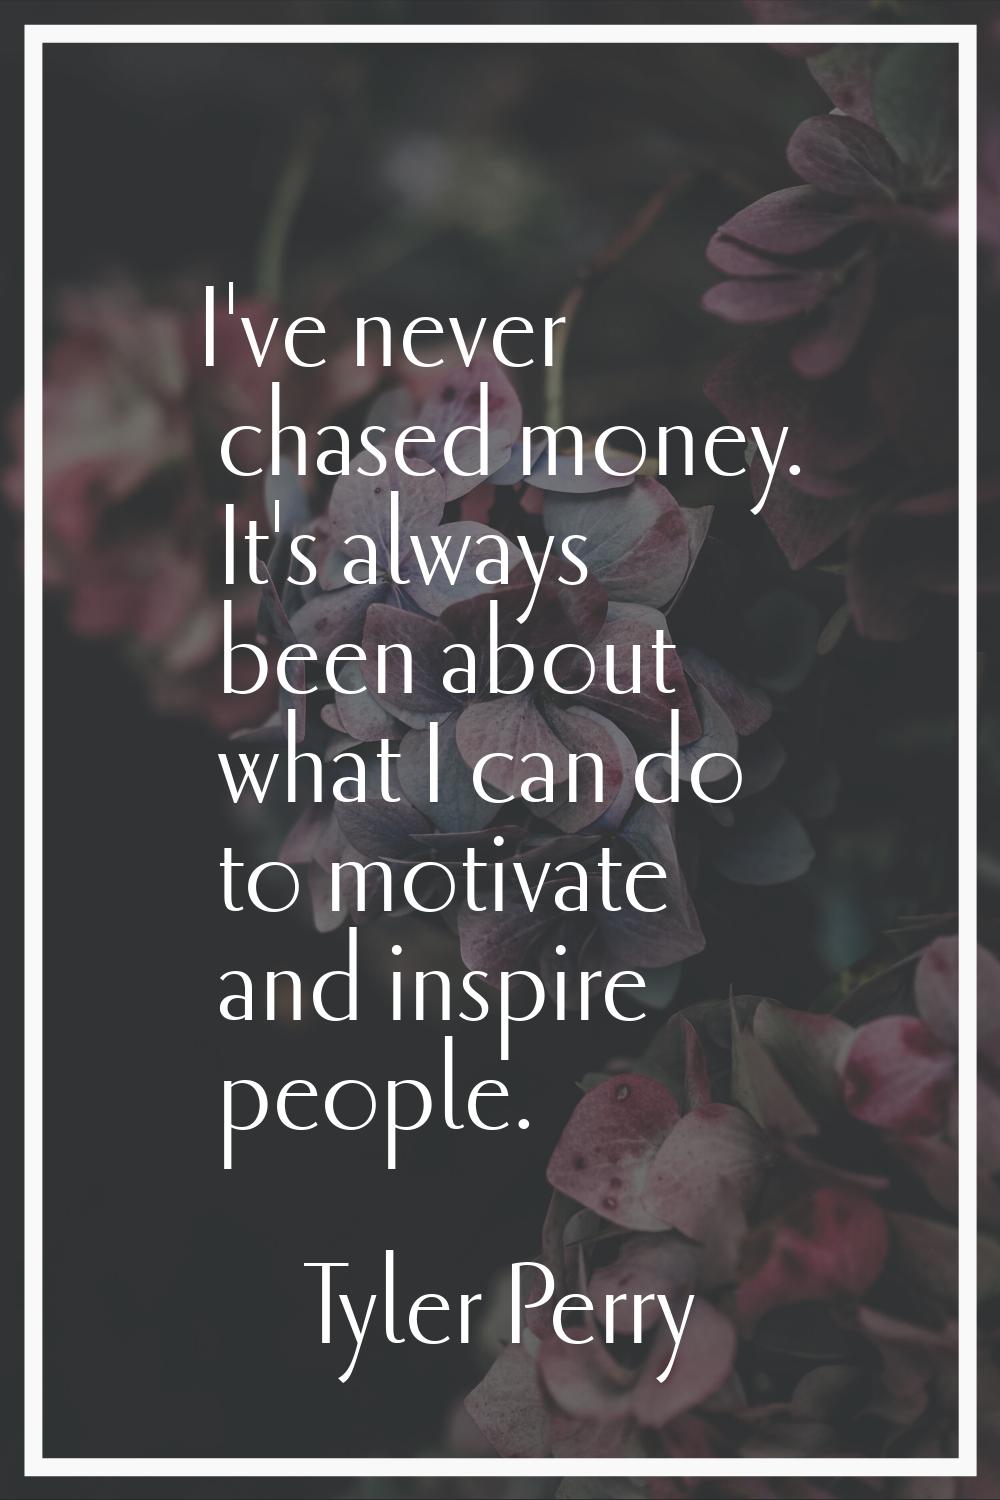 I've never chased money. It's always been about what I can do to motivate and inspire people.